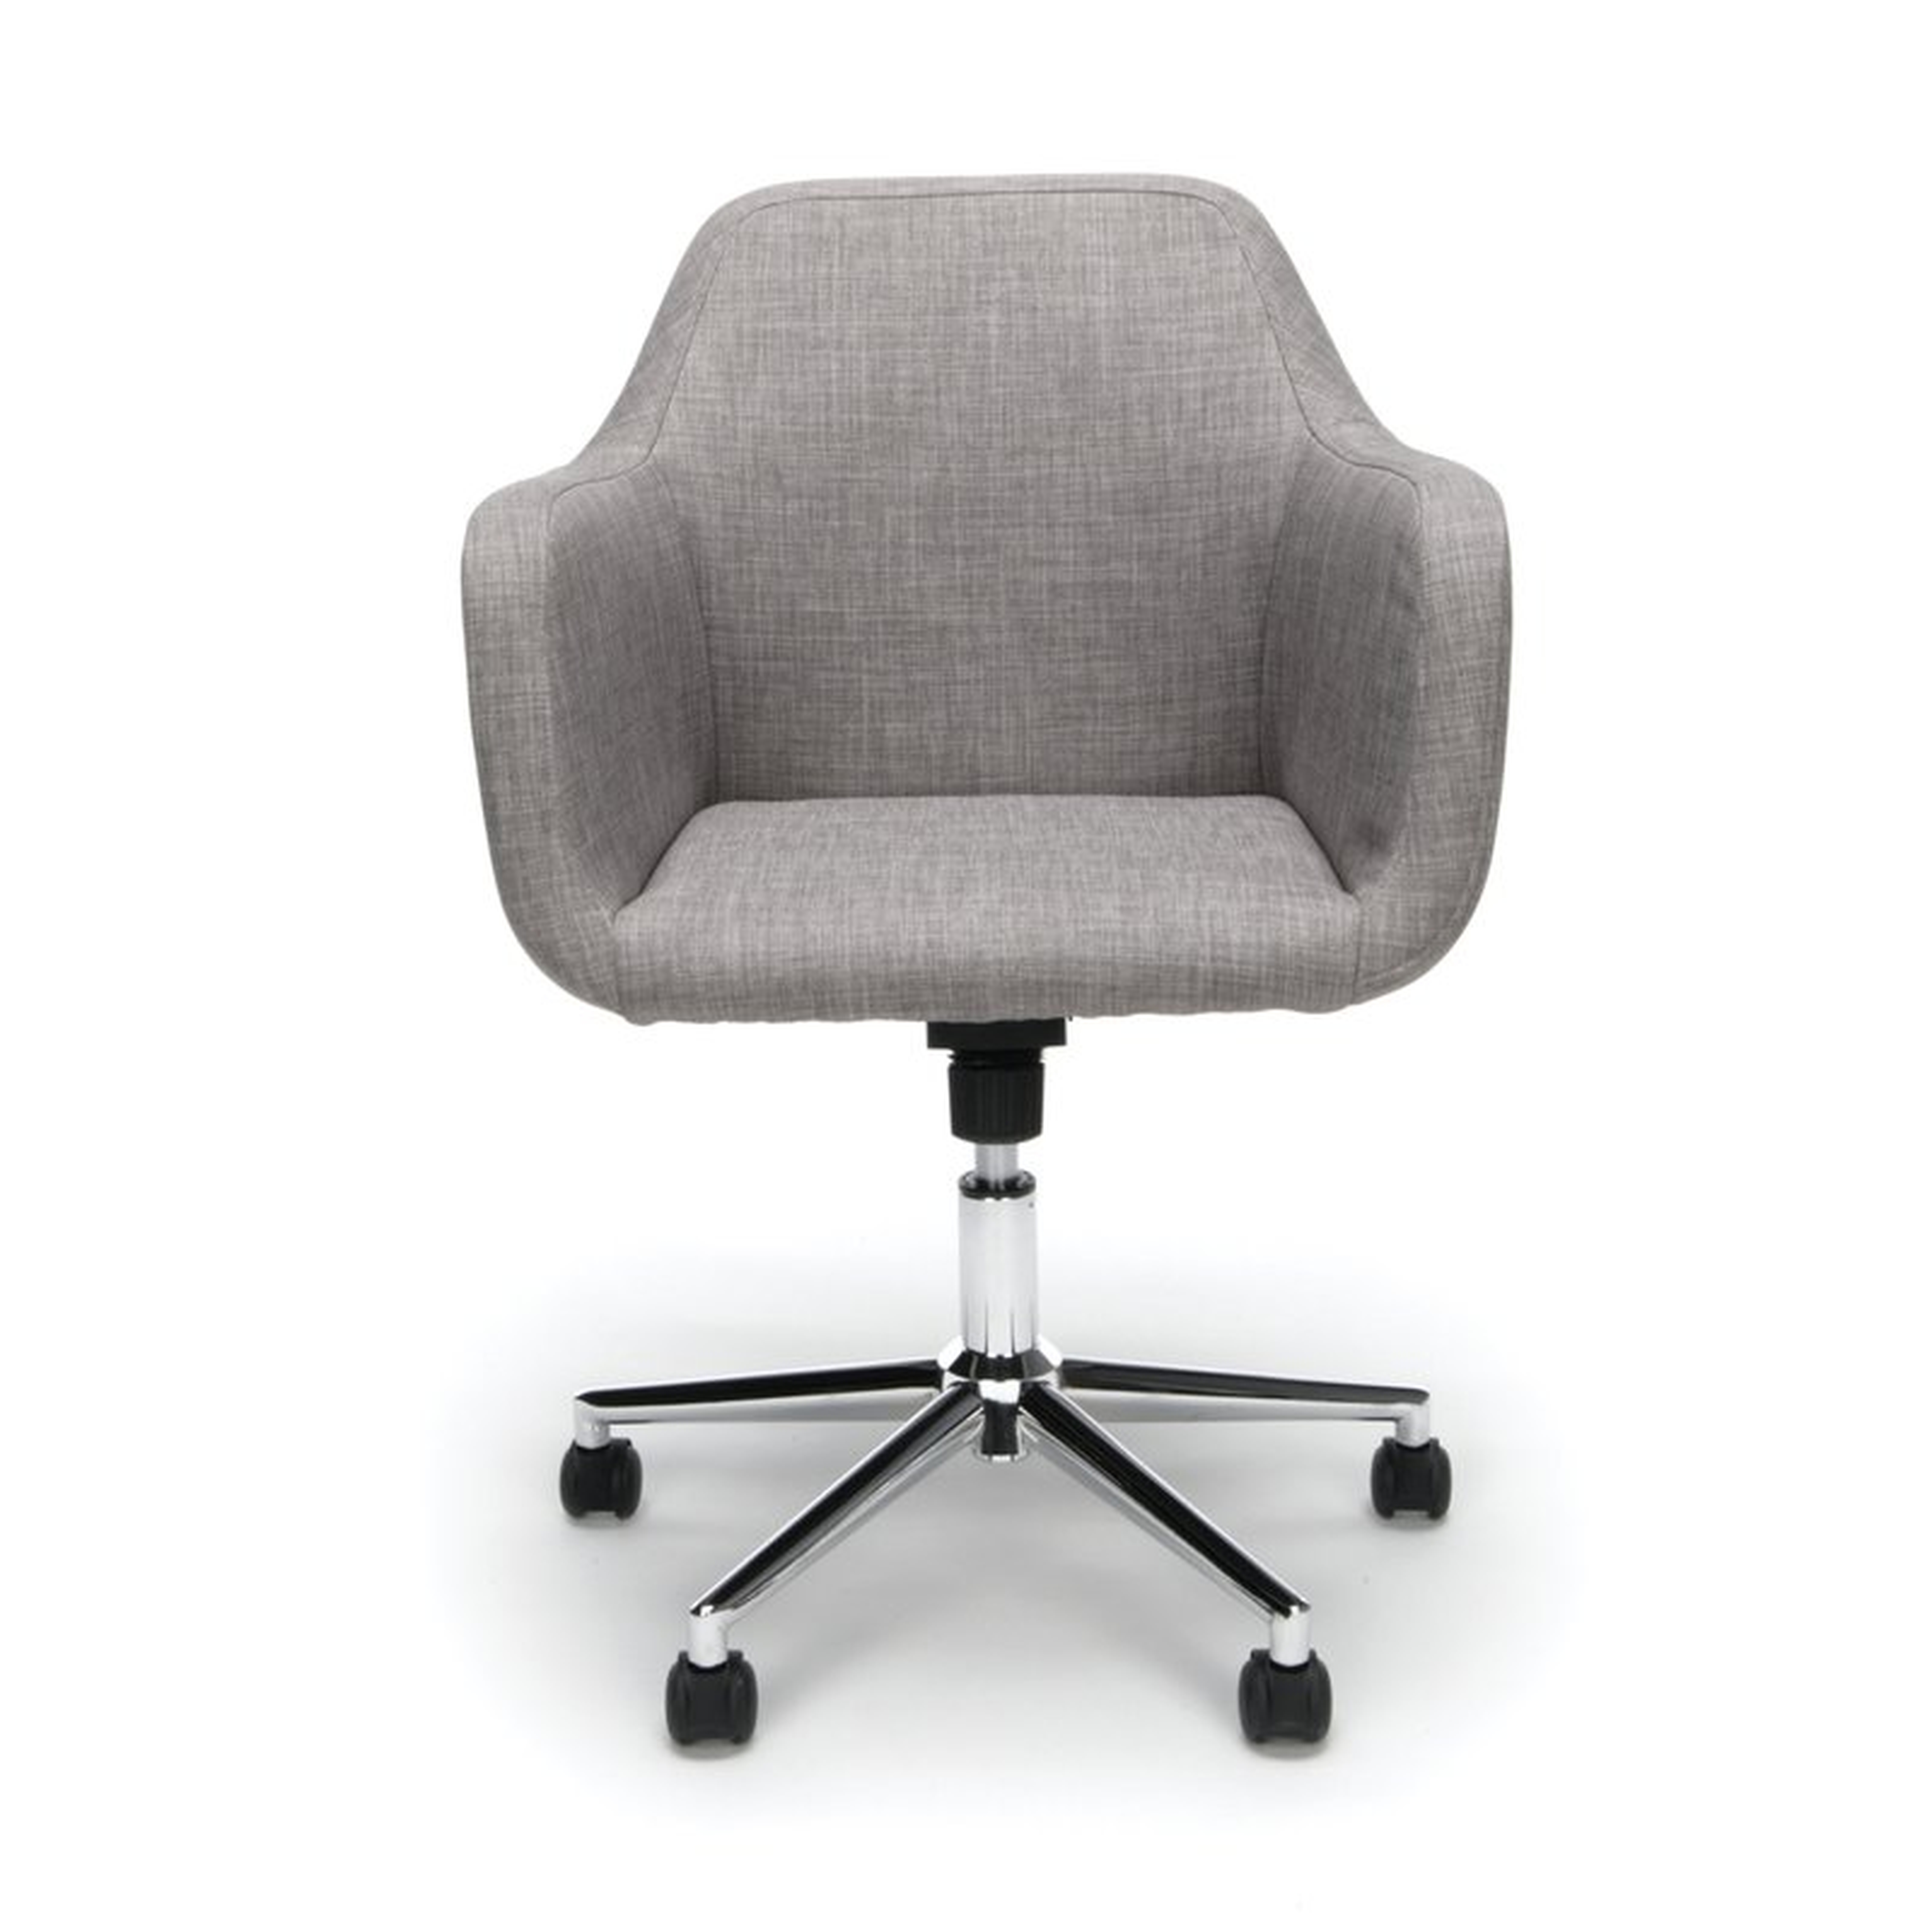 Rothenberg Upholstered Home Office Chair - GRAY - Wayfair